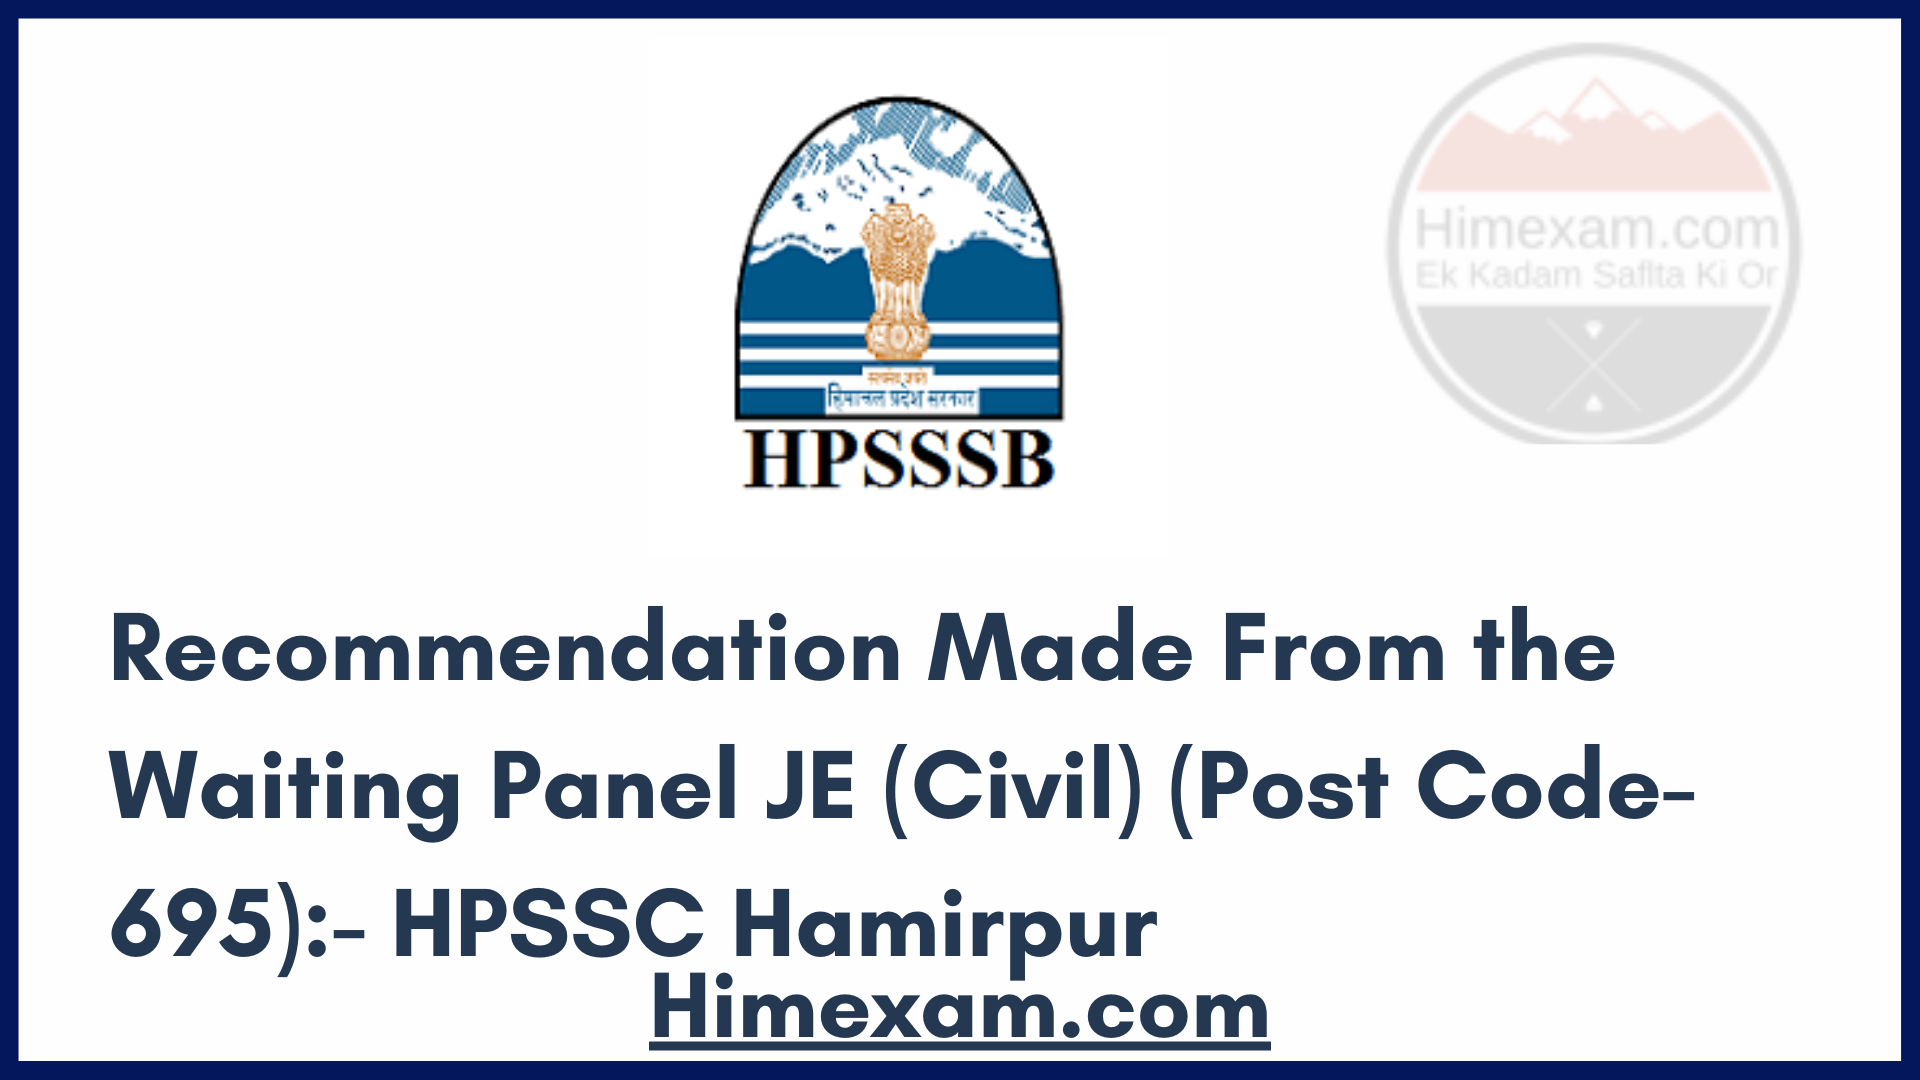 Recommendation Made From the Waiting Panel Junior Engineer (Civil) (Post Code-695):- HPSSC Hamirpur